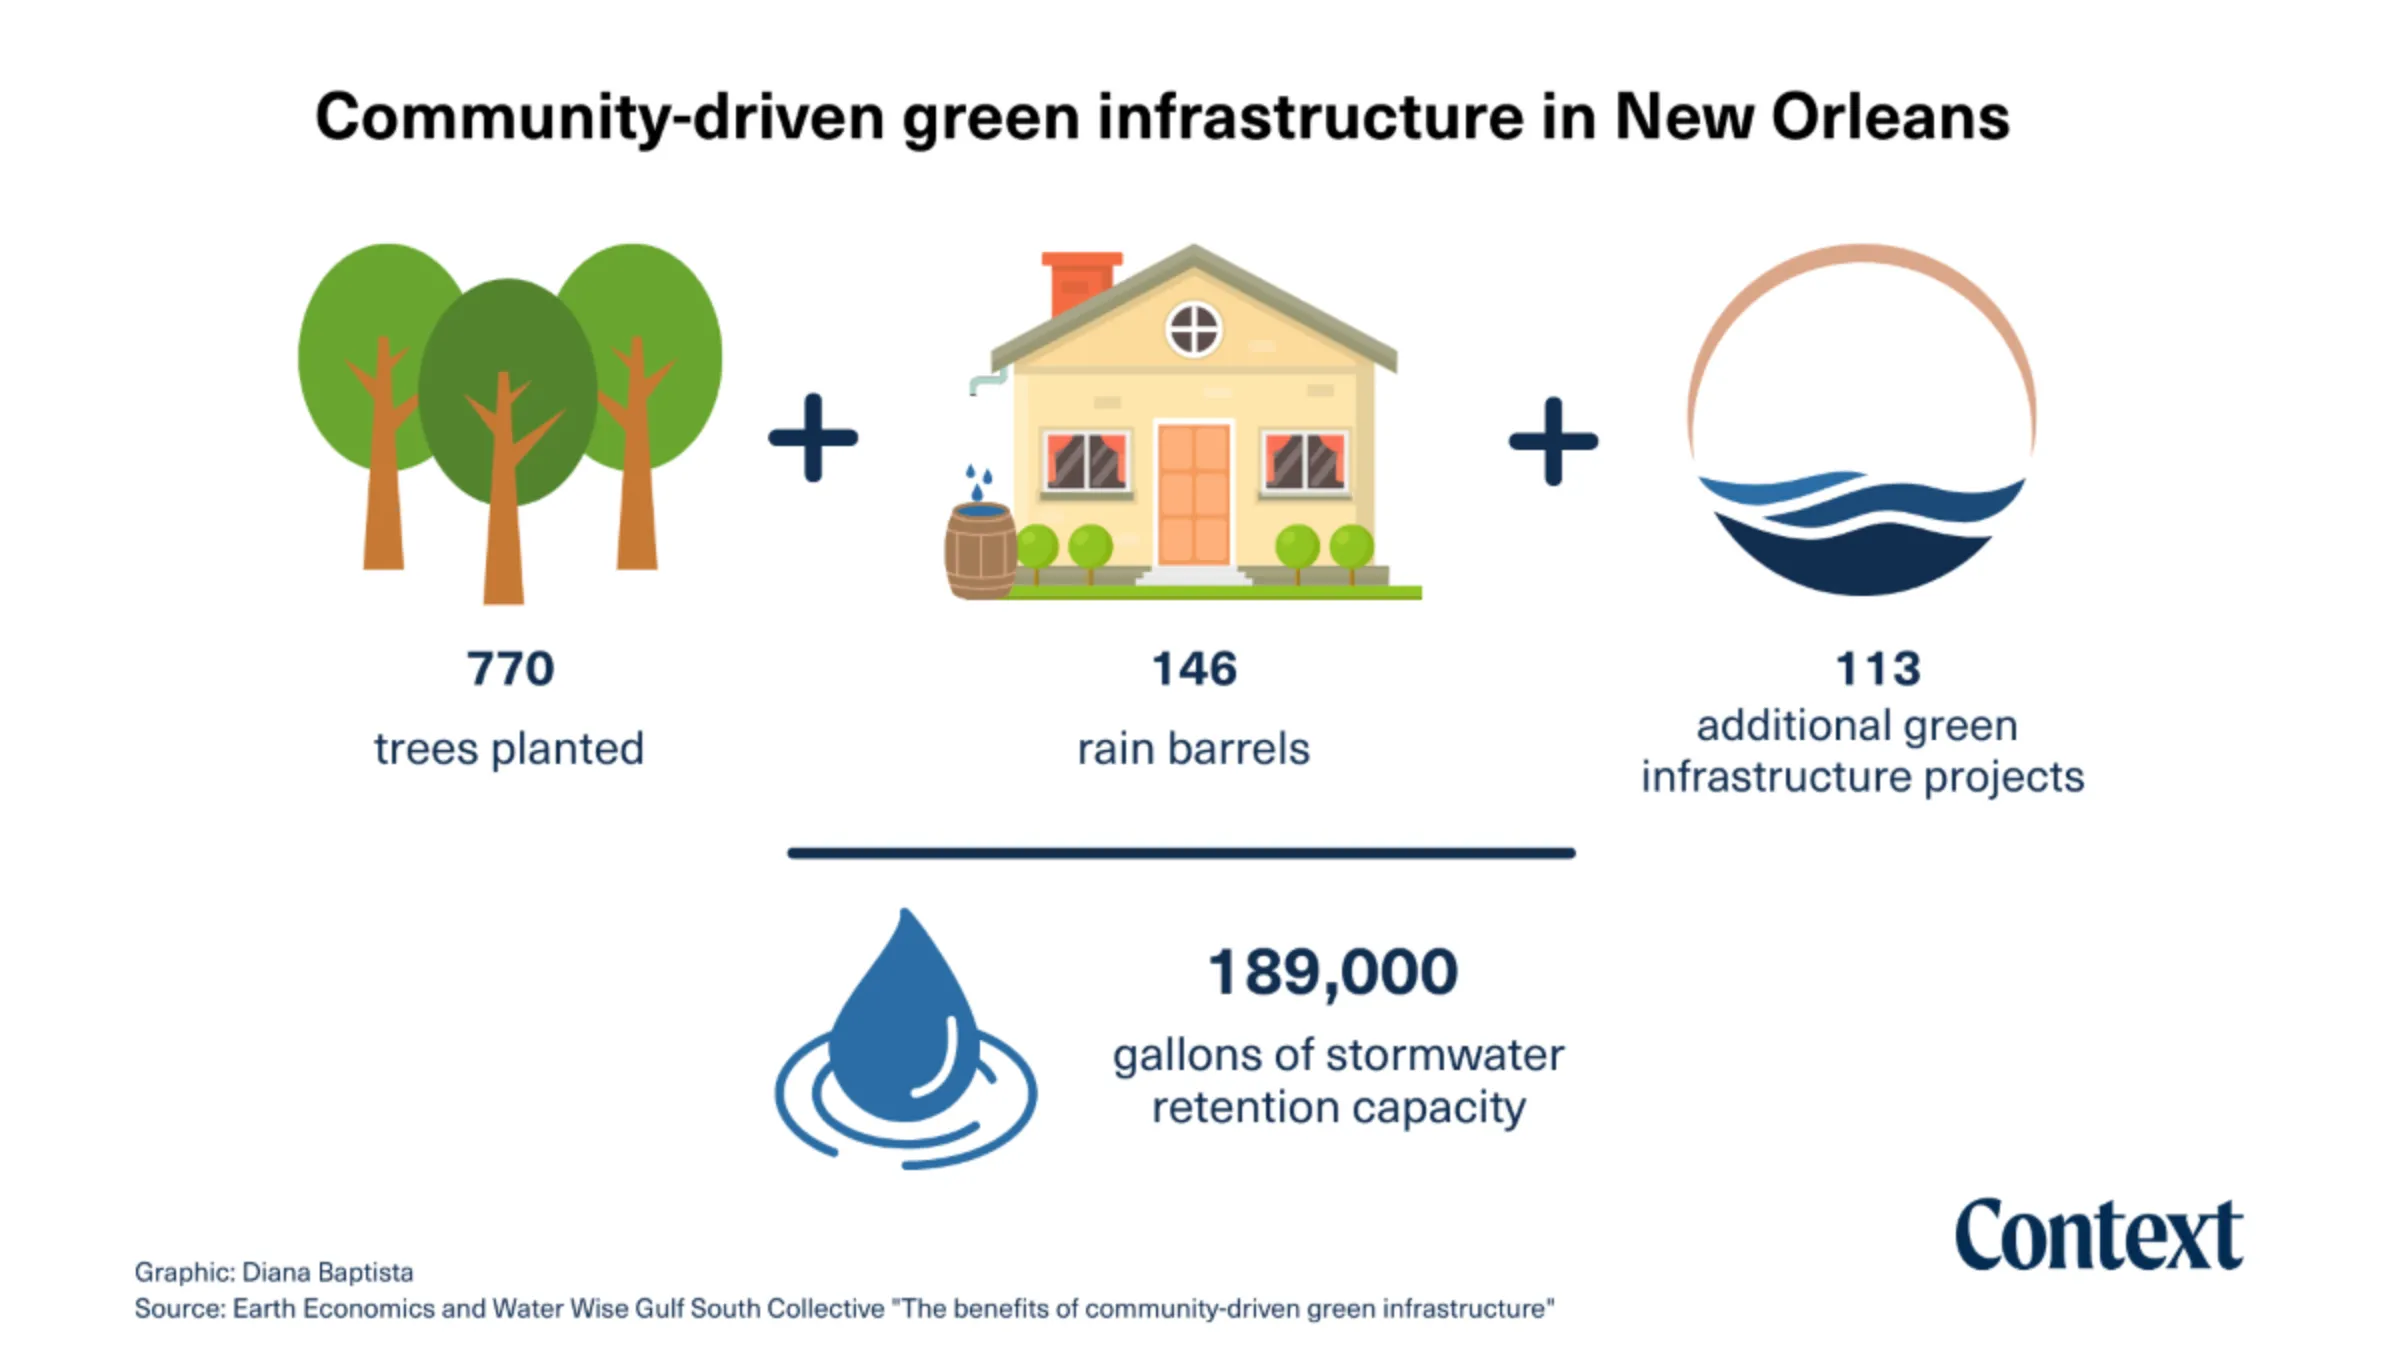 Community-driven green infrastructure in New Orleans is shown is this graphic